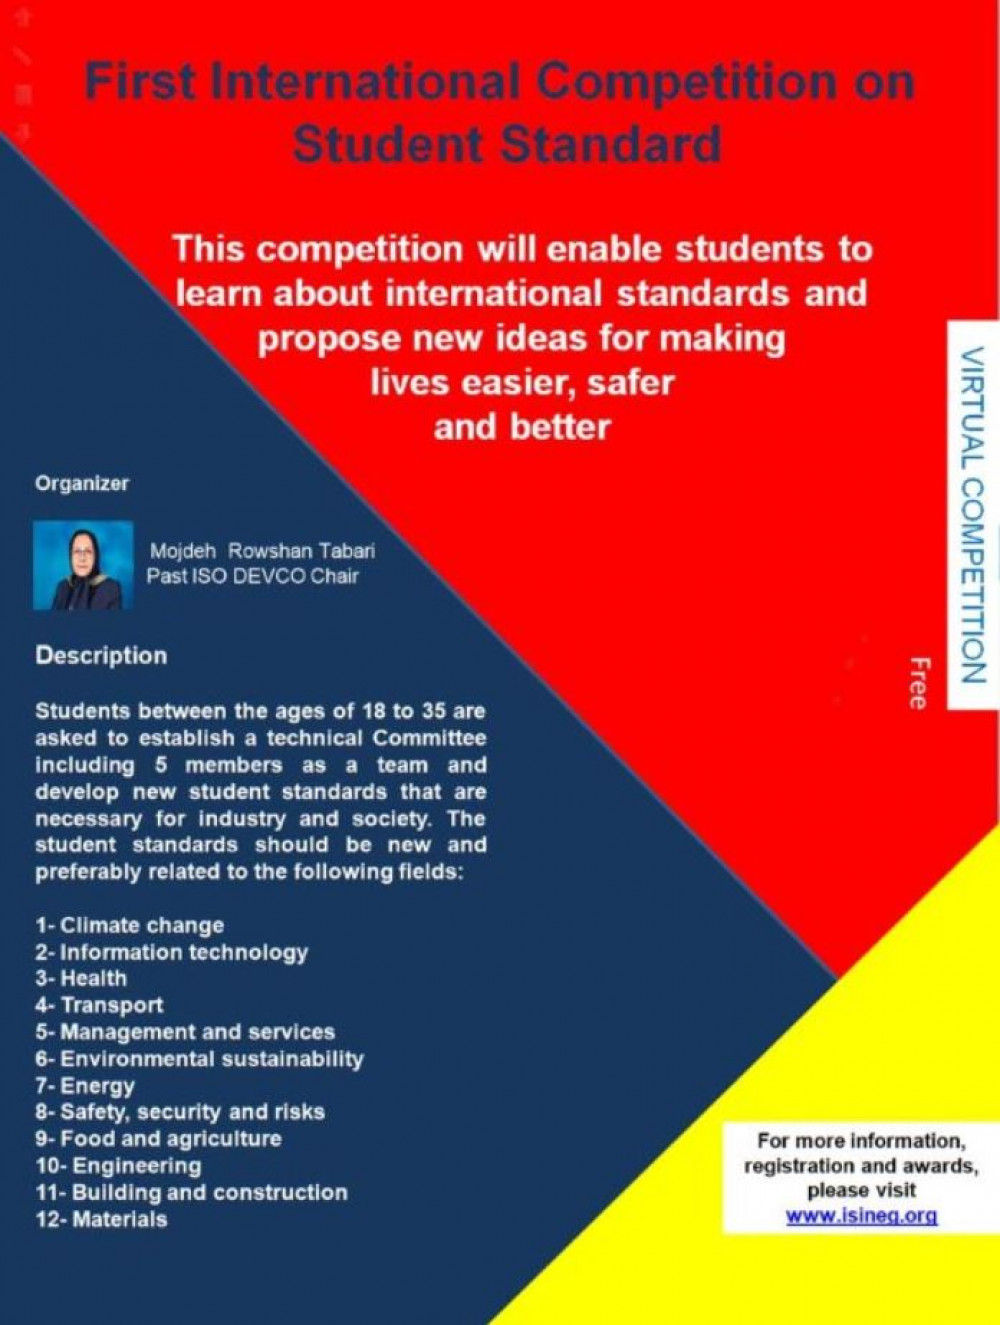 First International Competition on Student Standard